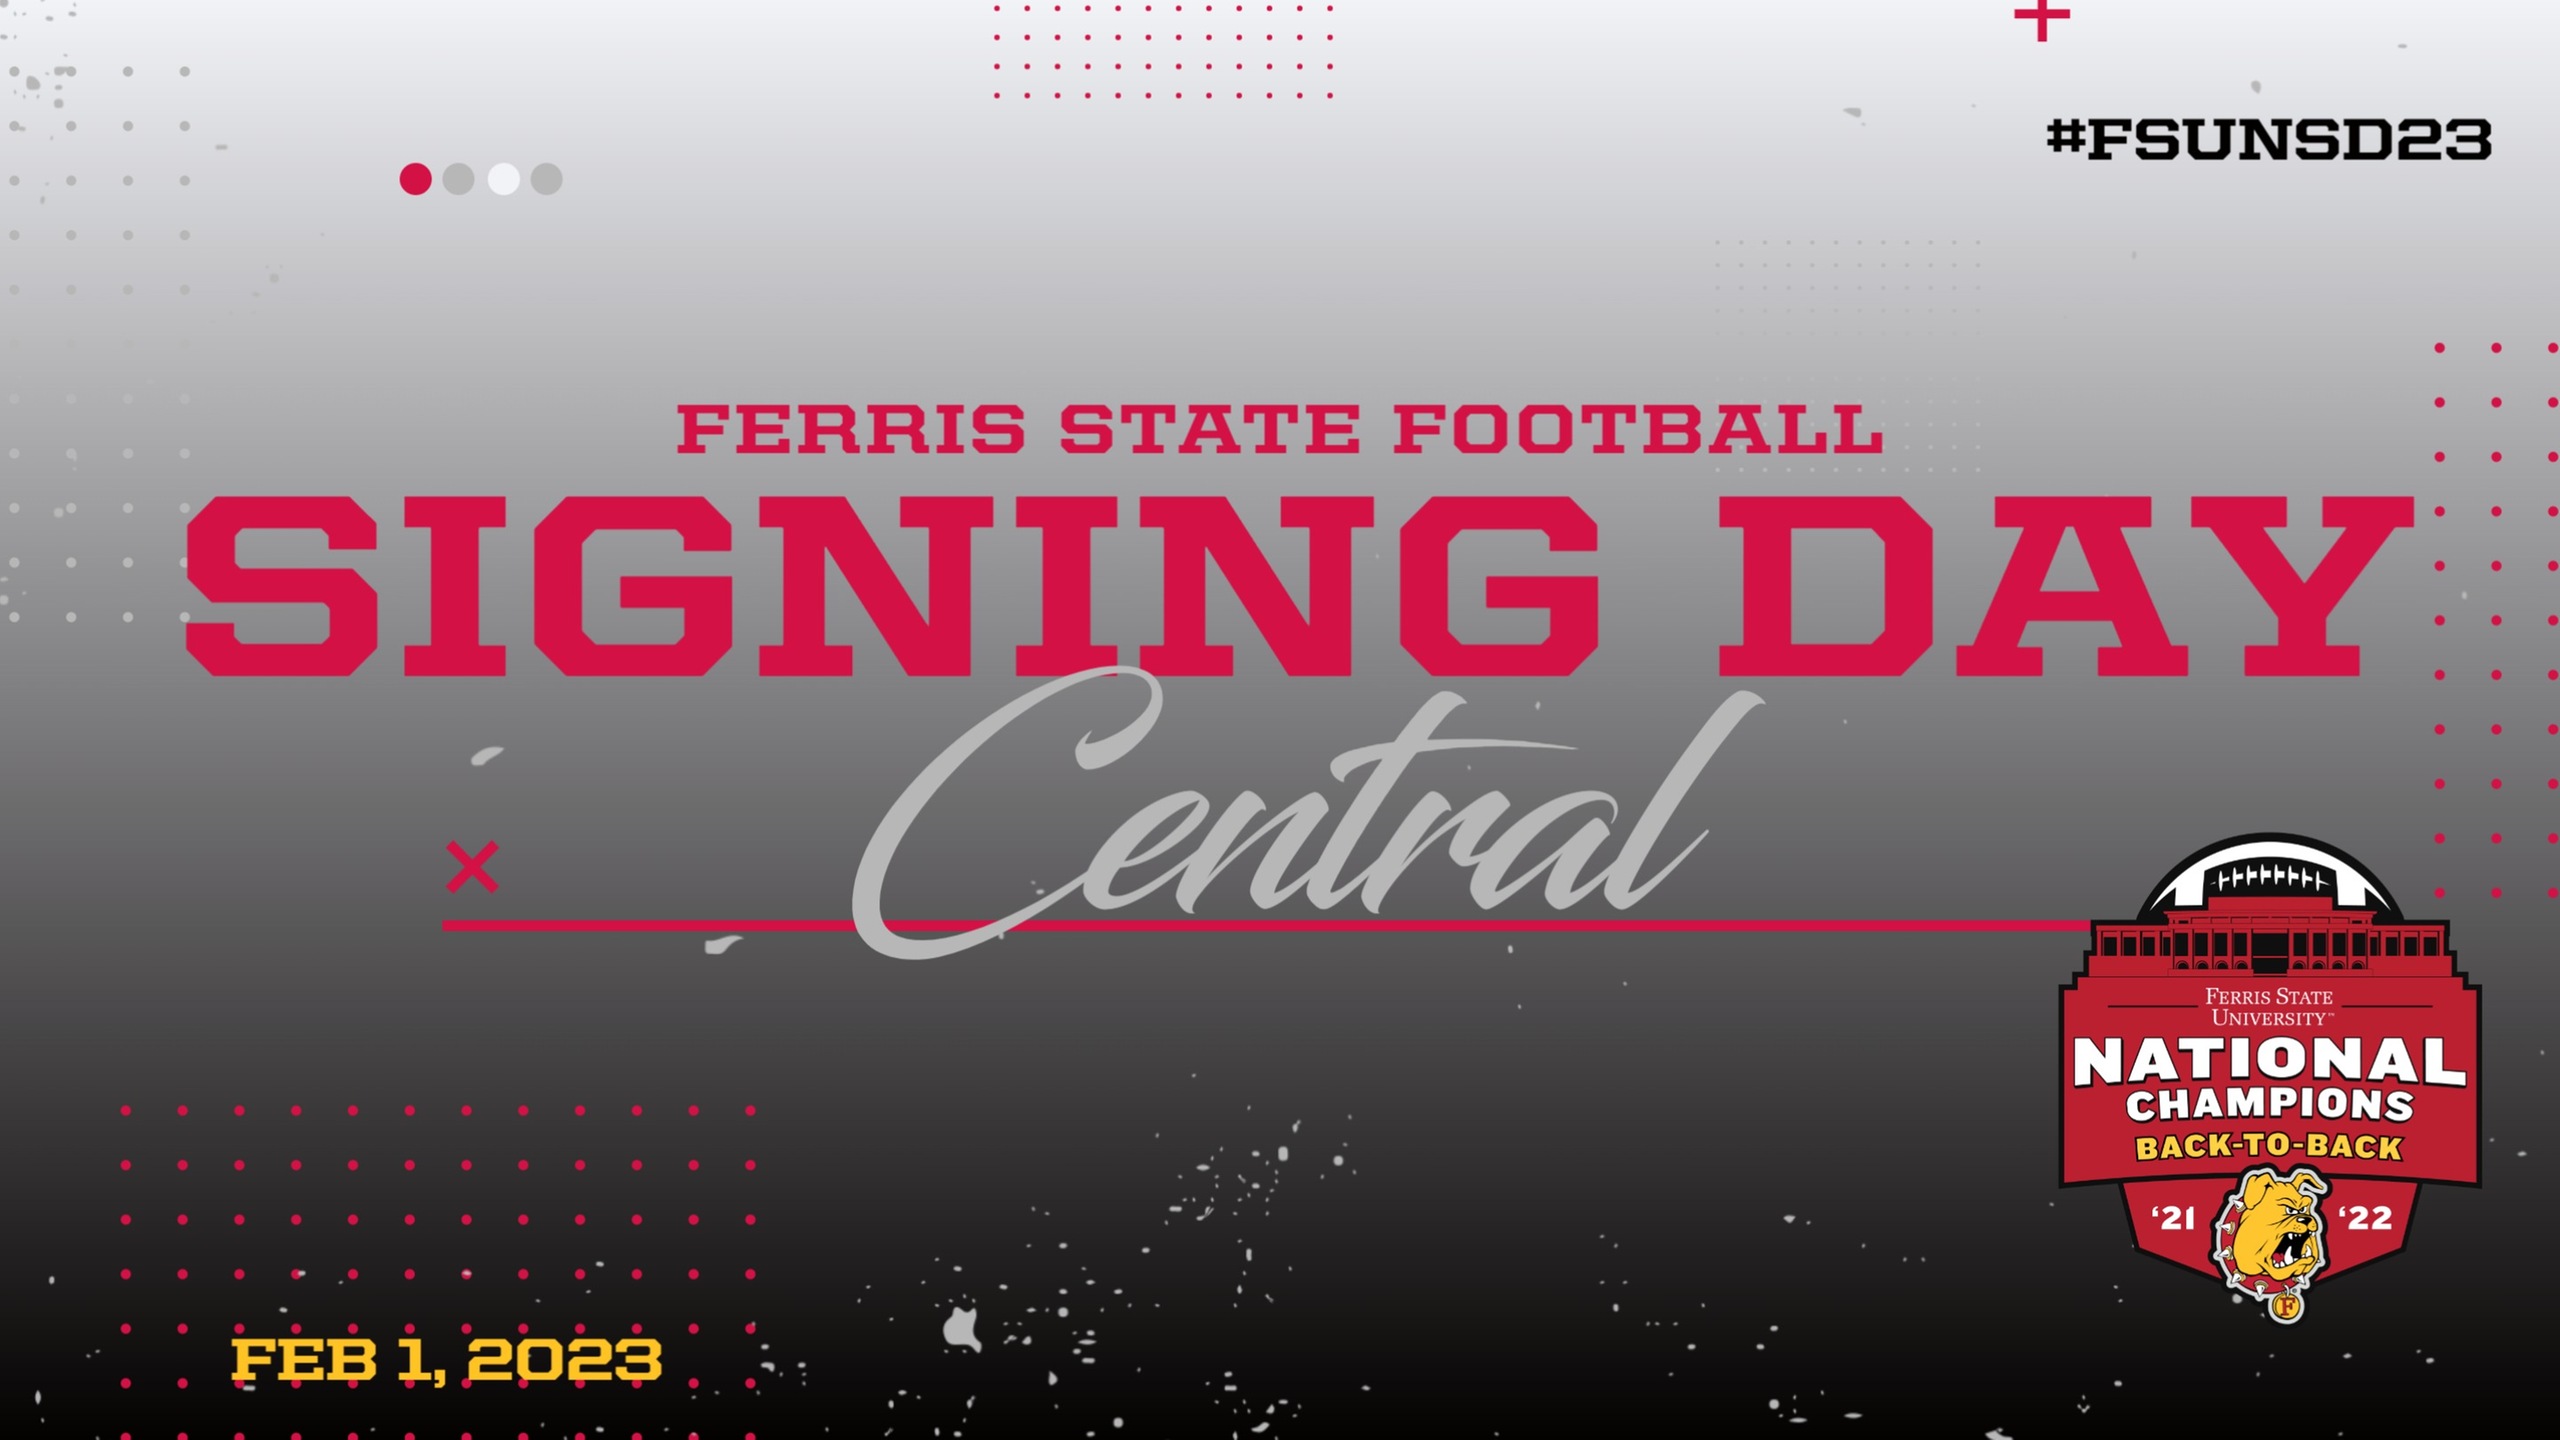 Ferris State Football - Signing Day Central